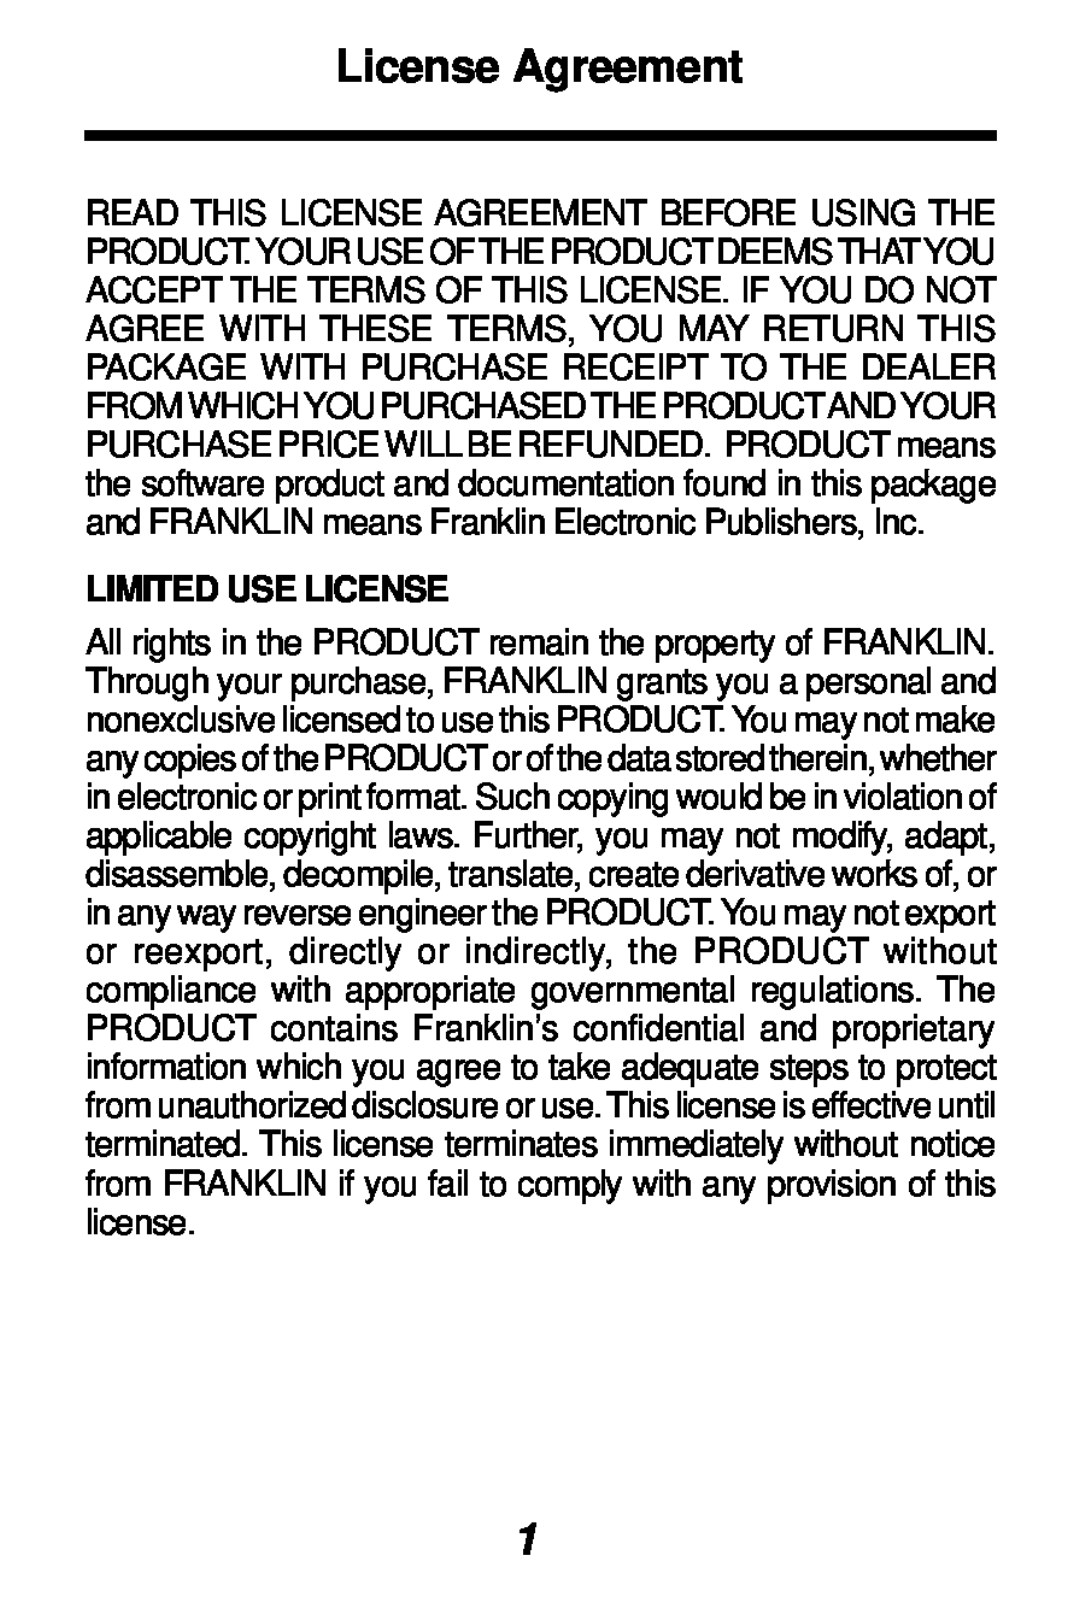 Franklin TES-106 manual License Agreement, Limited Use License 